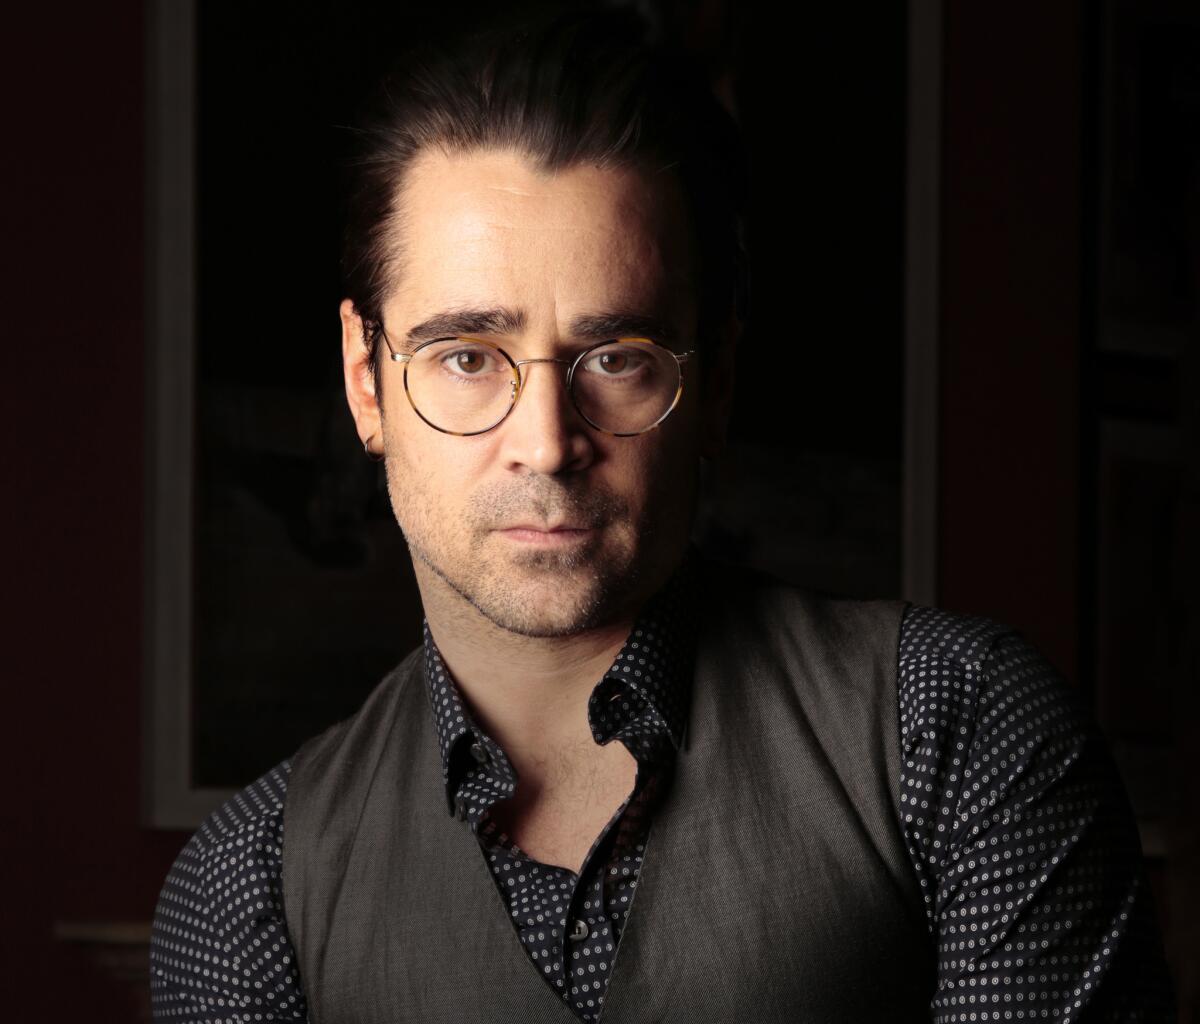 Colin Farrell, who stars in the new romance "Winter's Tale," photographed in New York on Feb. 9, 2014.